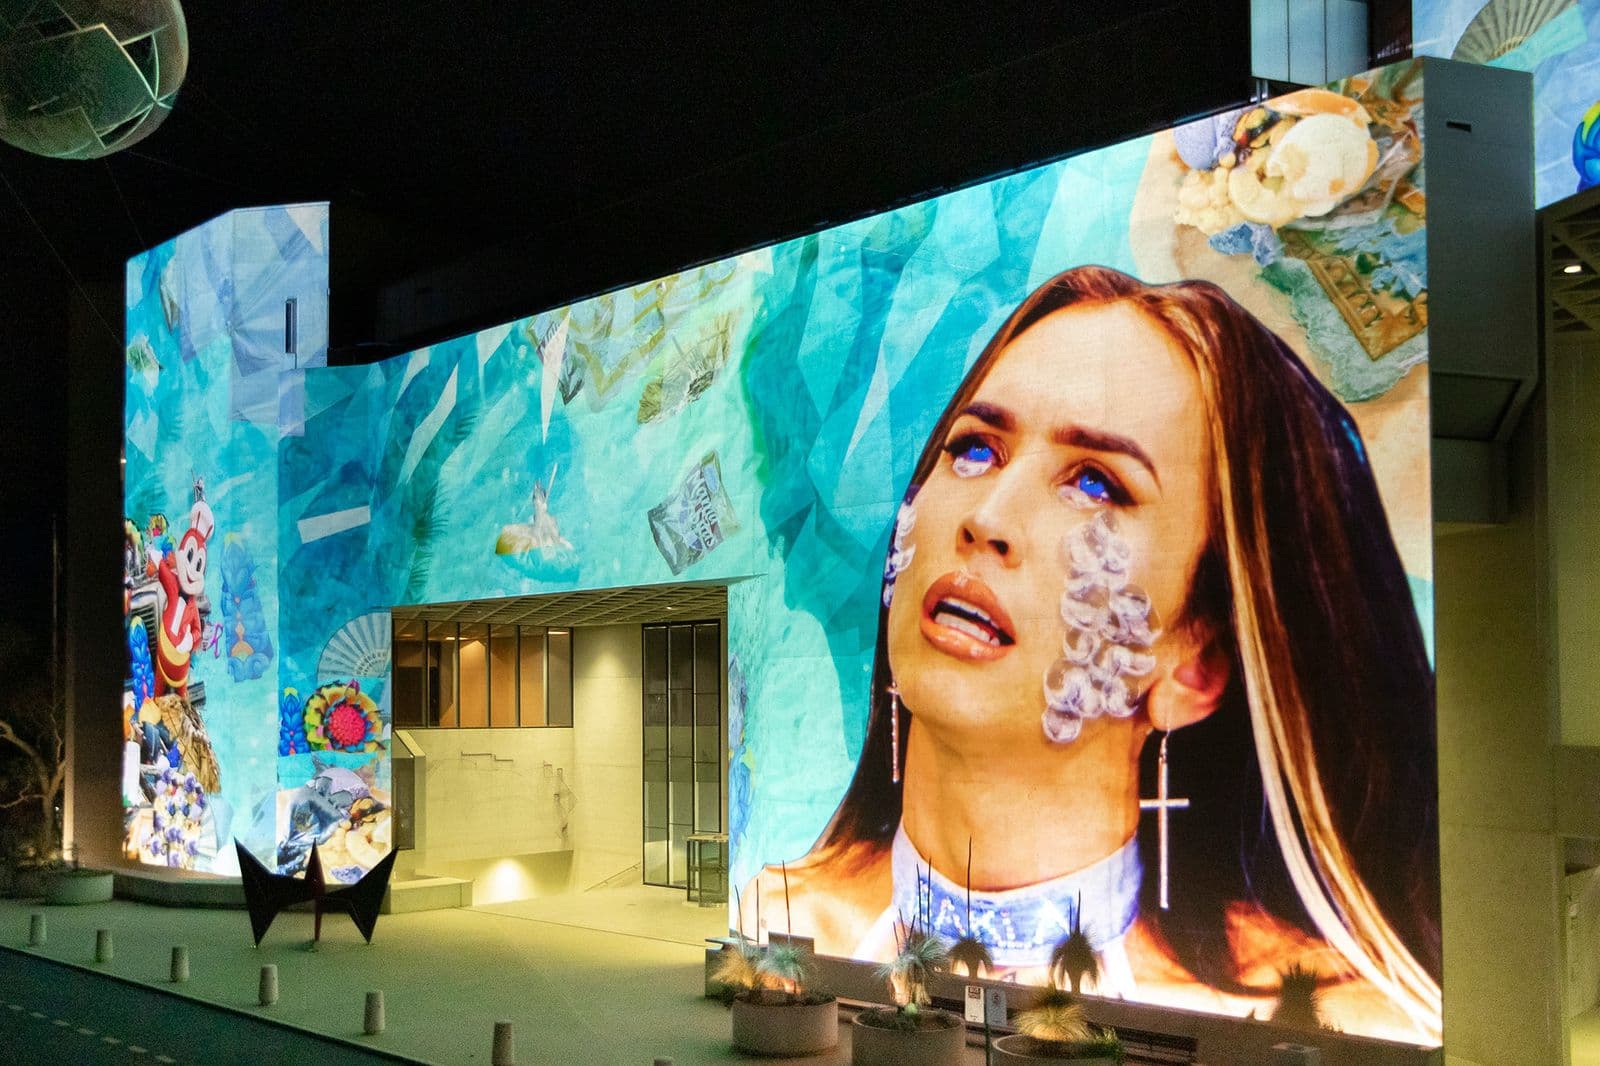 National Gallery facade lit up with colourful video projections